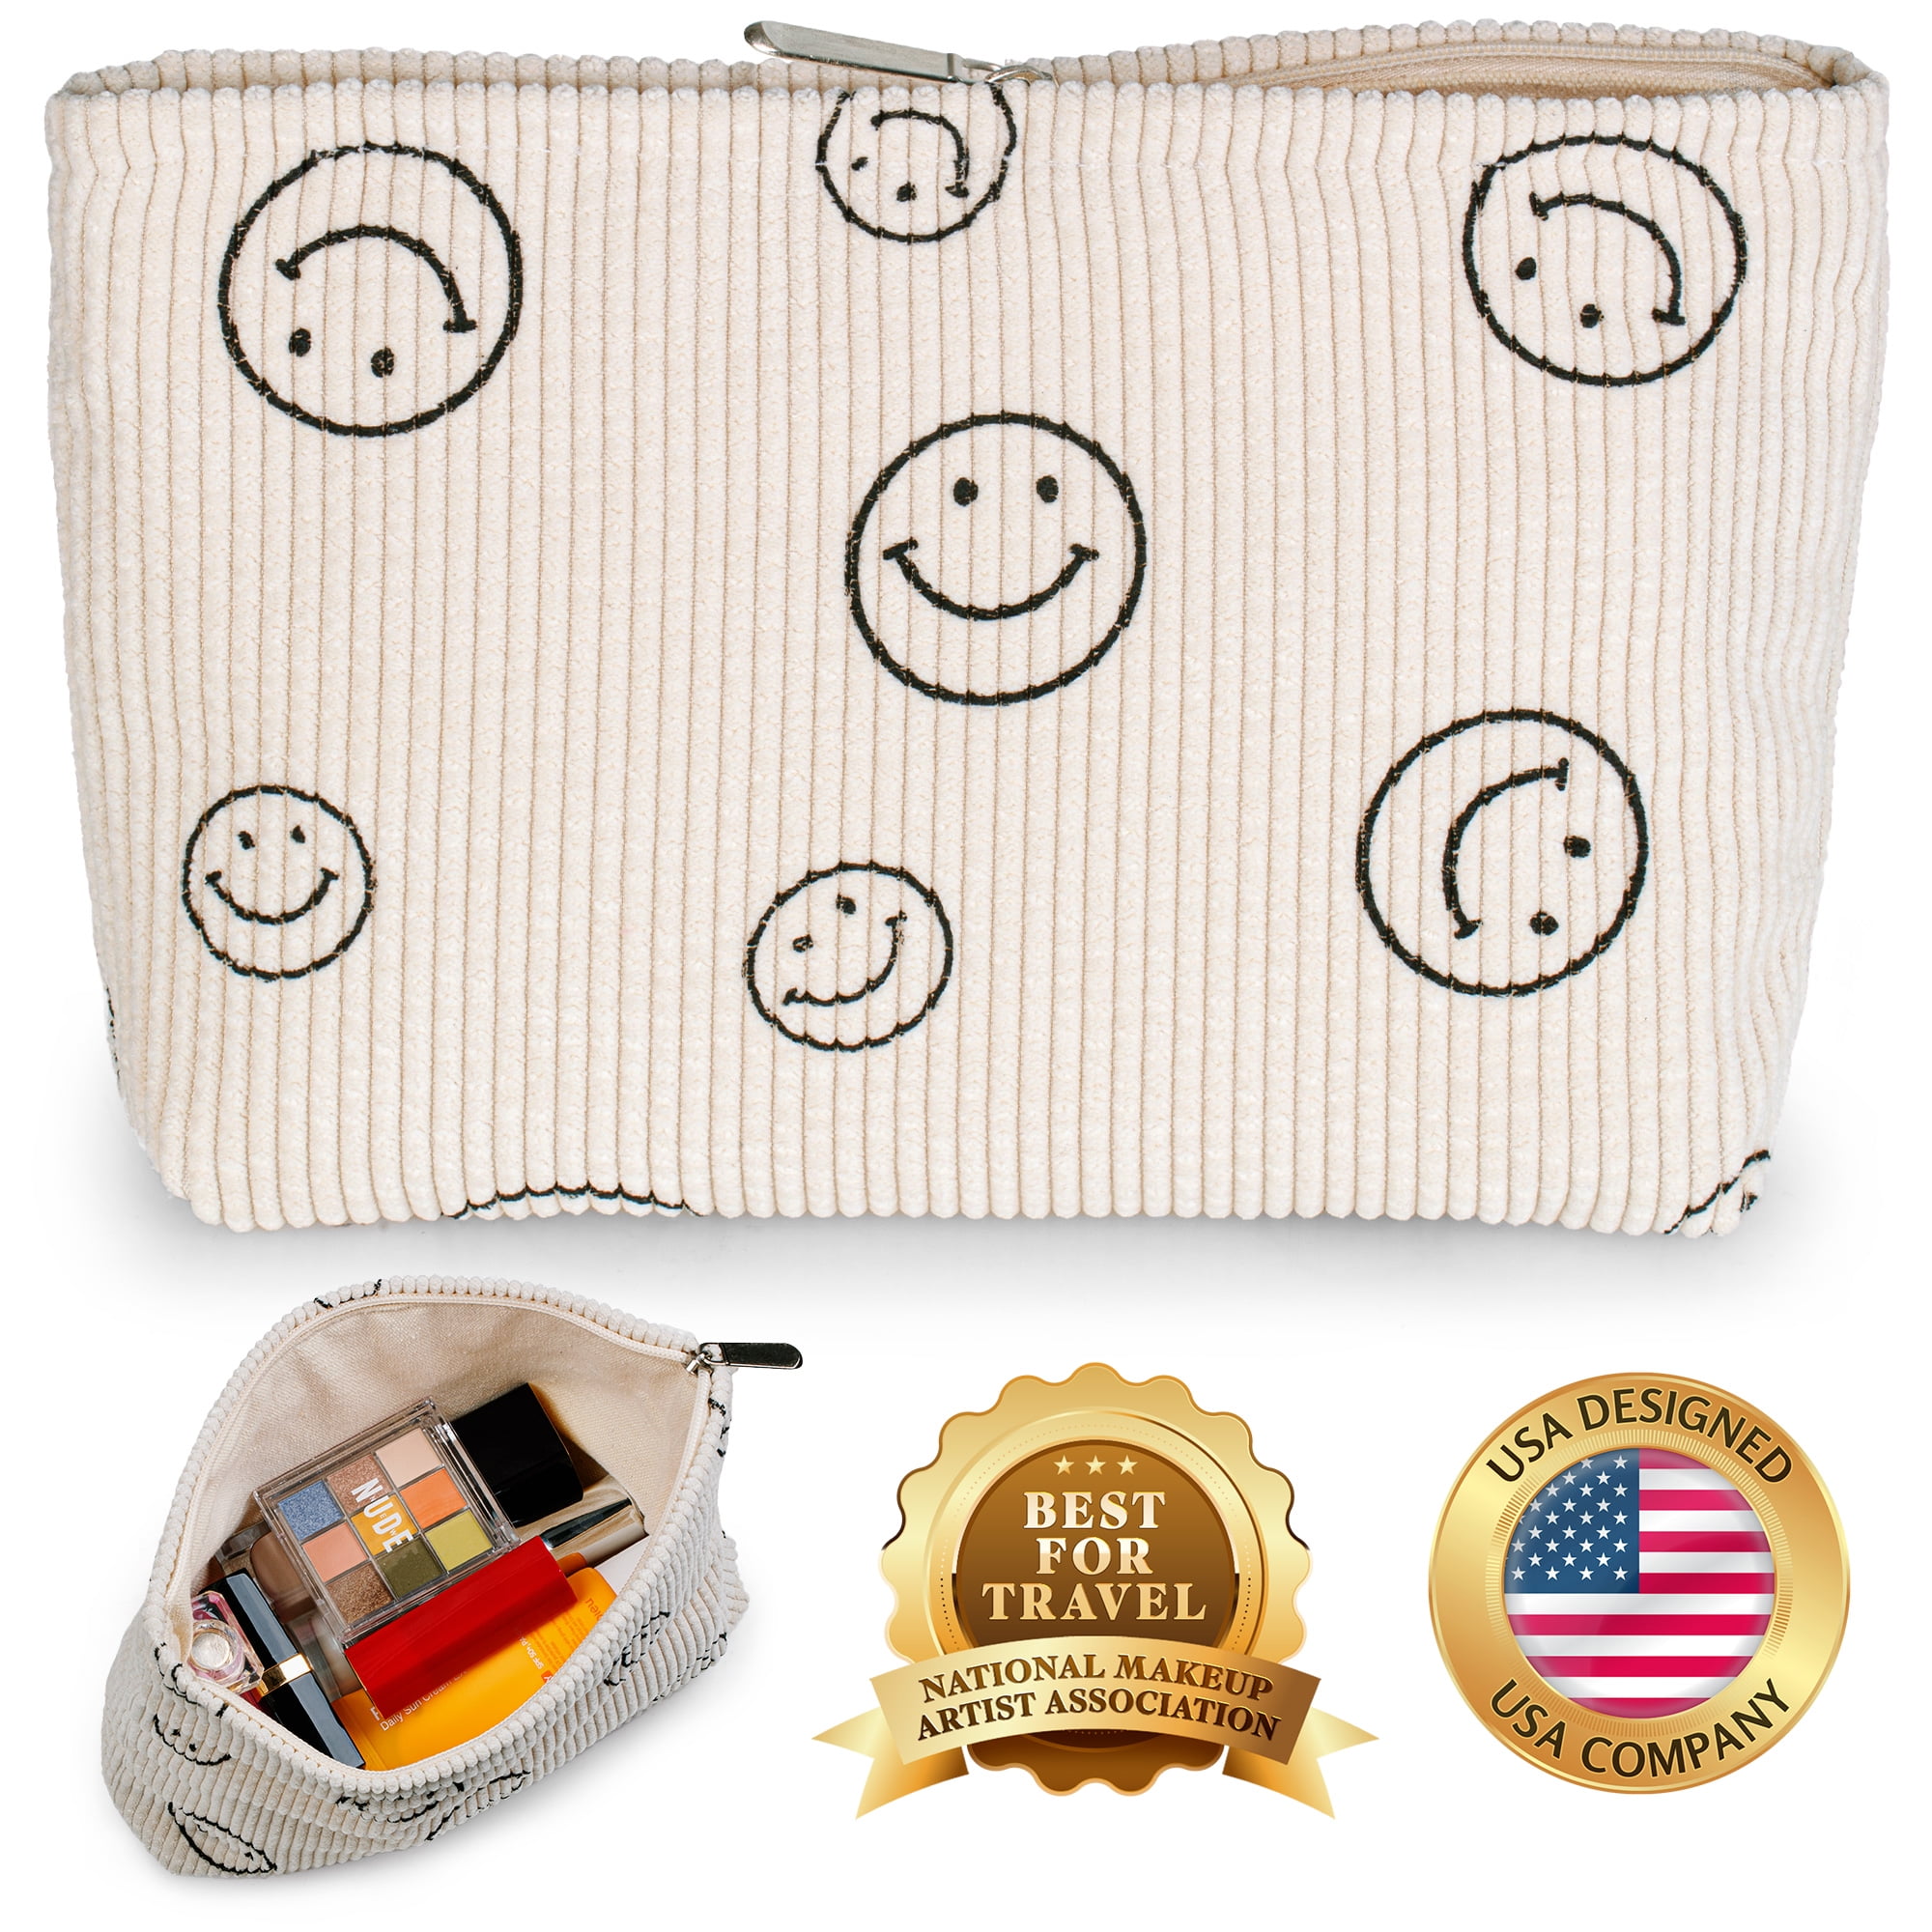 Makeup Bag for Women (Beige Latte), Cute Smiley Face Cosmetic Toiletry ...